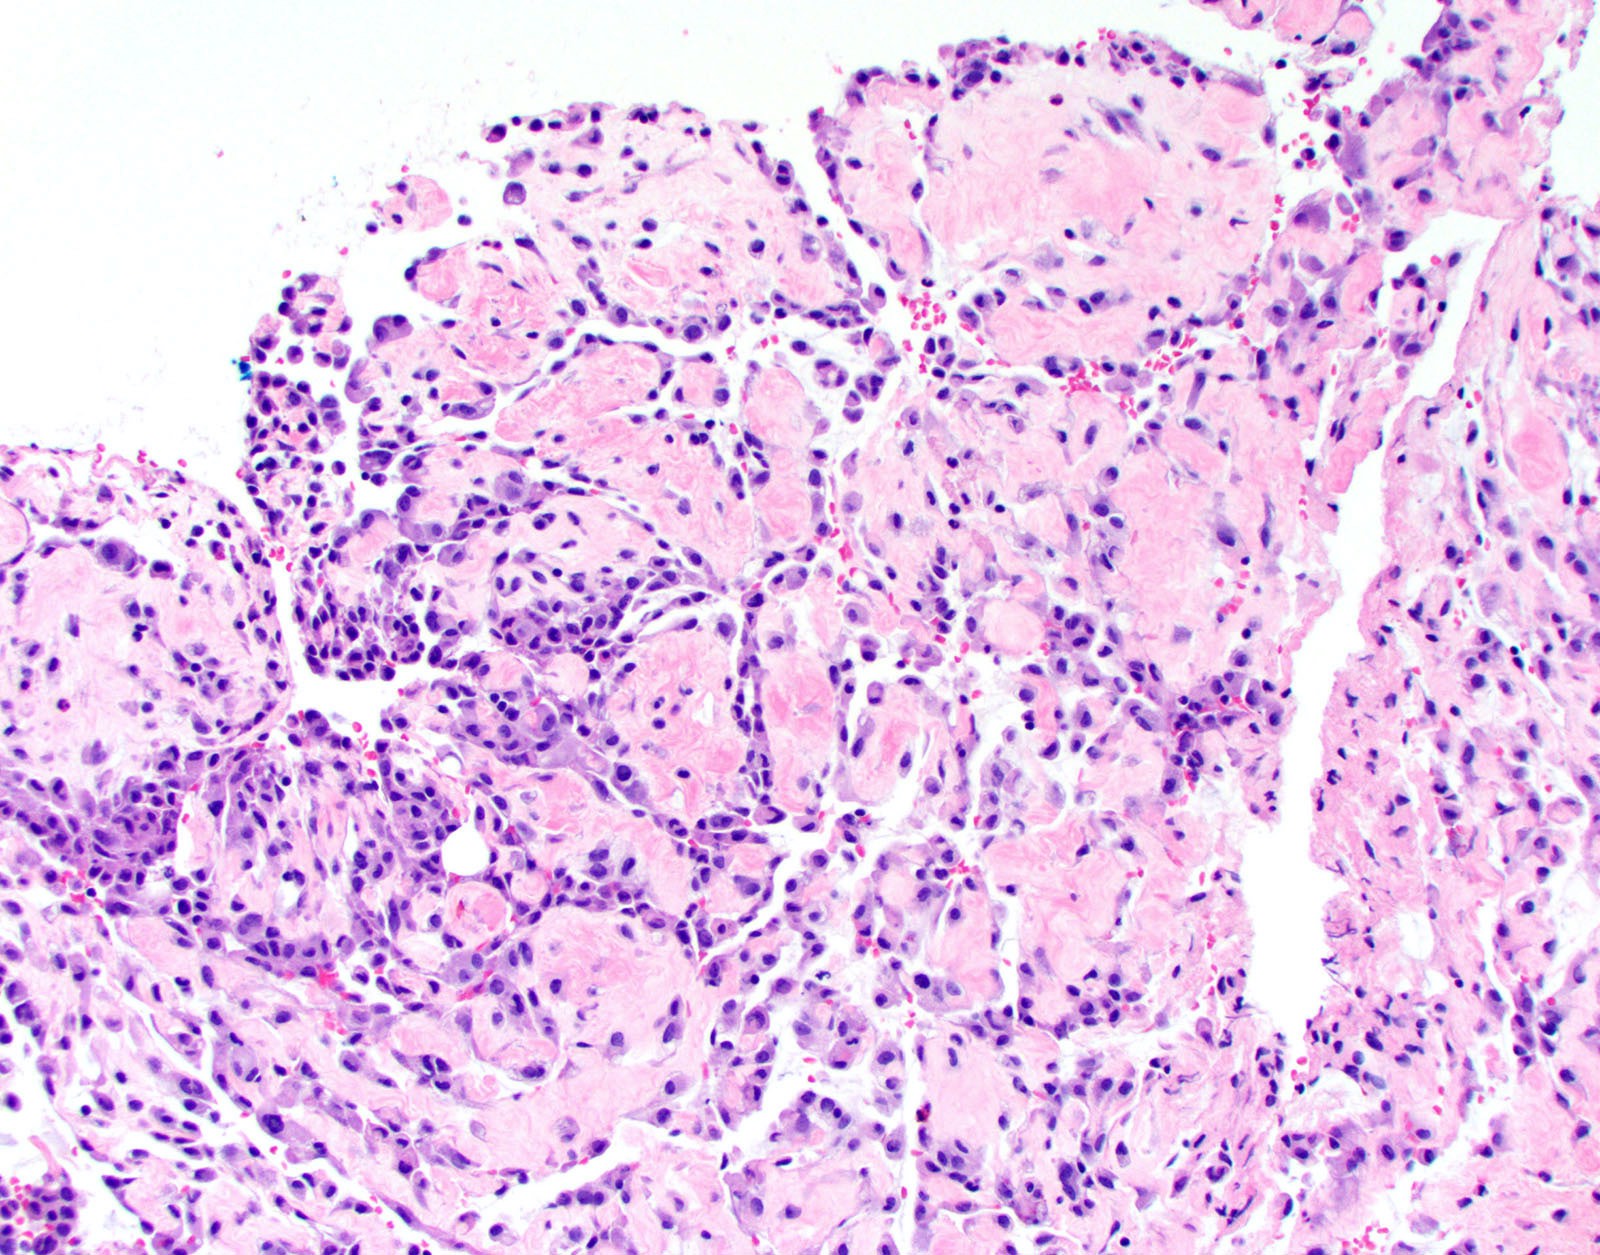 Fibrosis of papillary cores